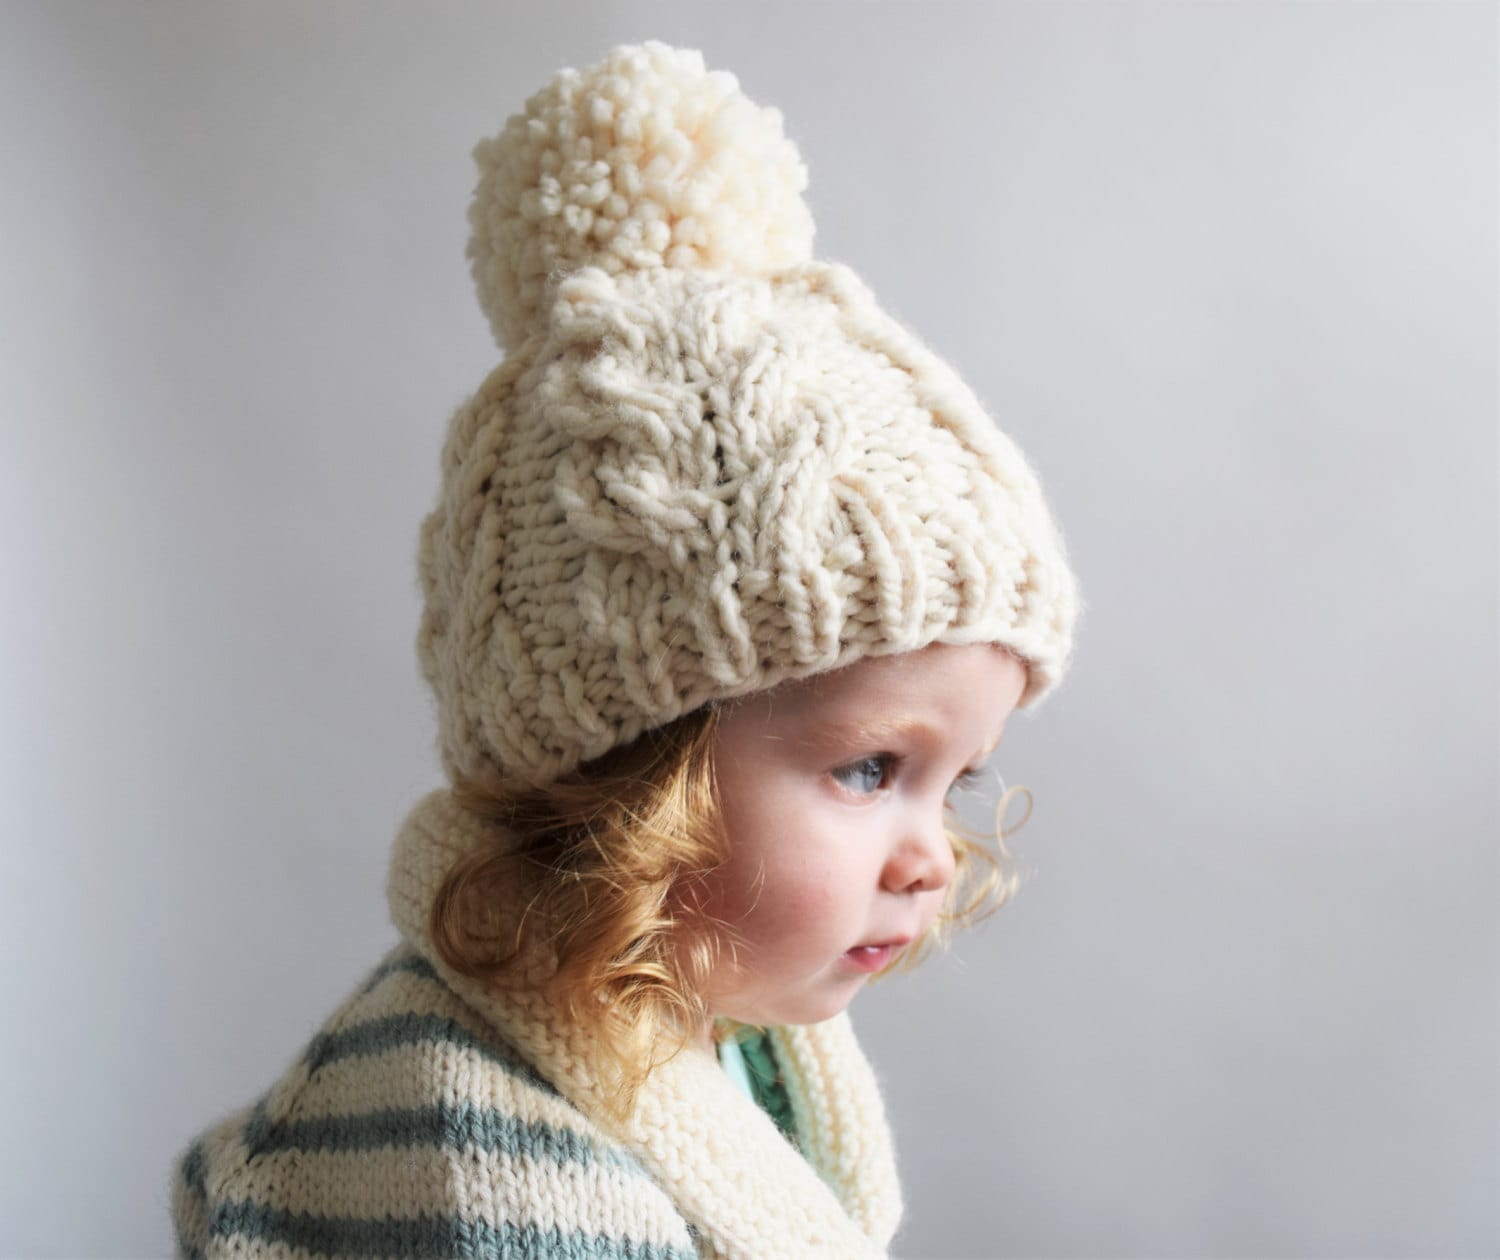 How to knit a double pom pom hat - Knifty Knittings